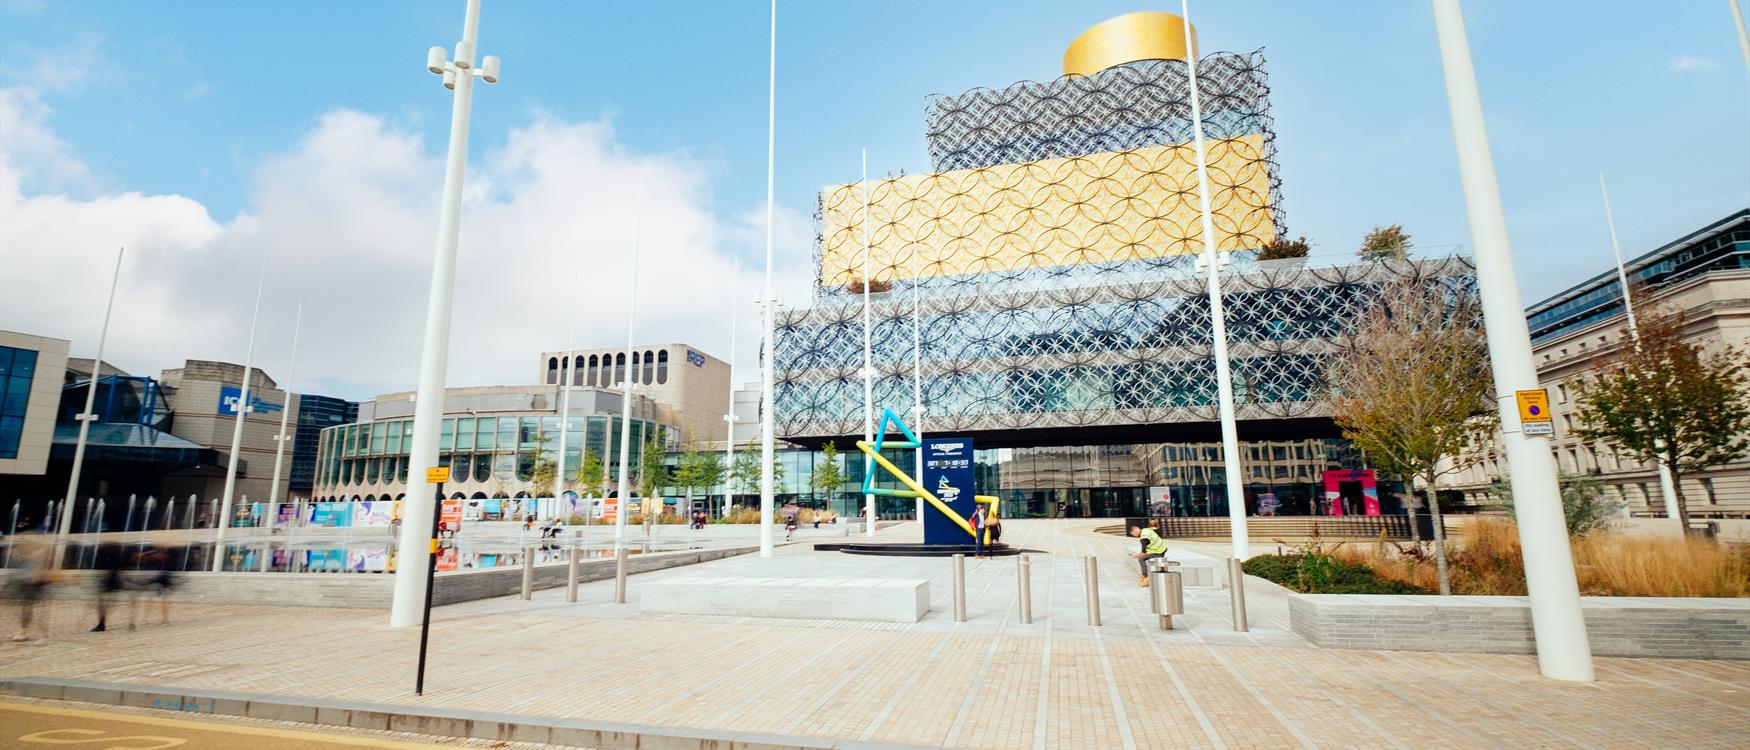 Download everything you need to explore the West Midlands